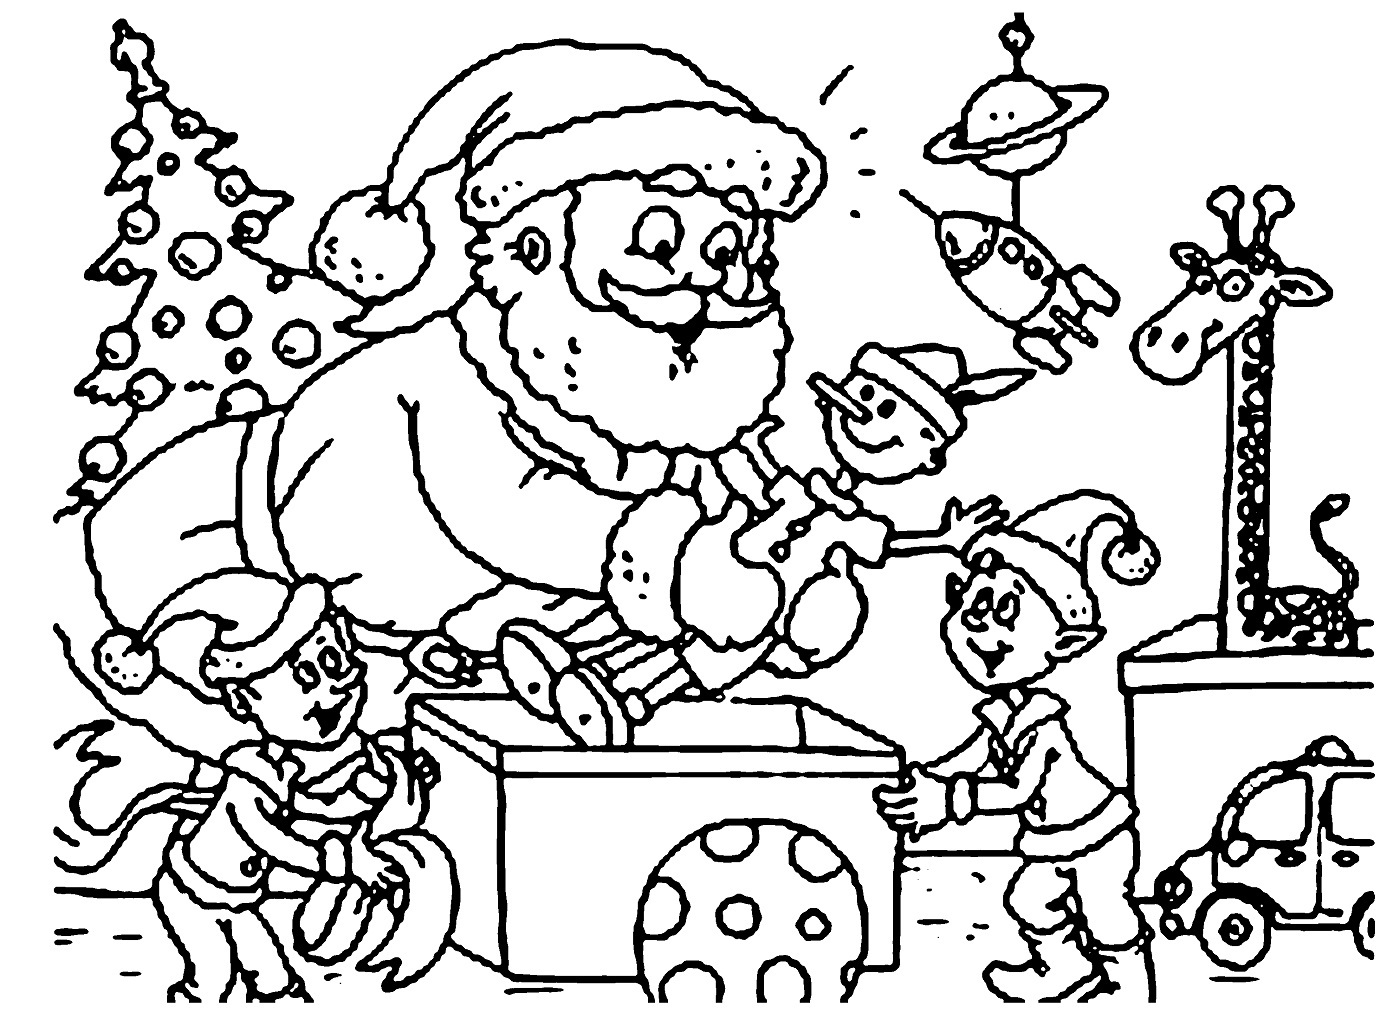 caco3 coloring pages - photo #43